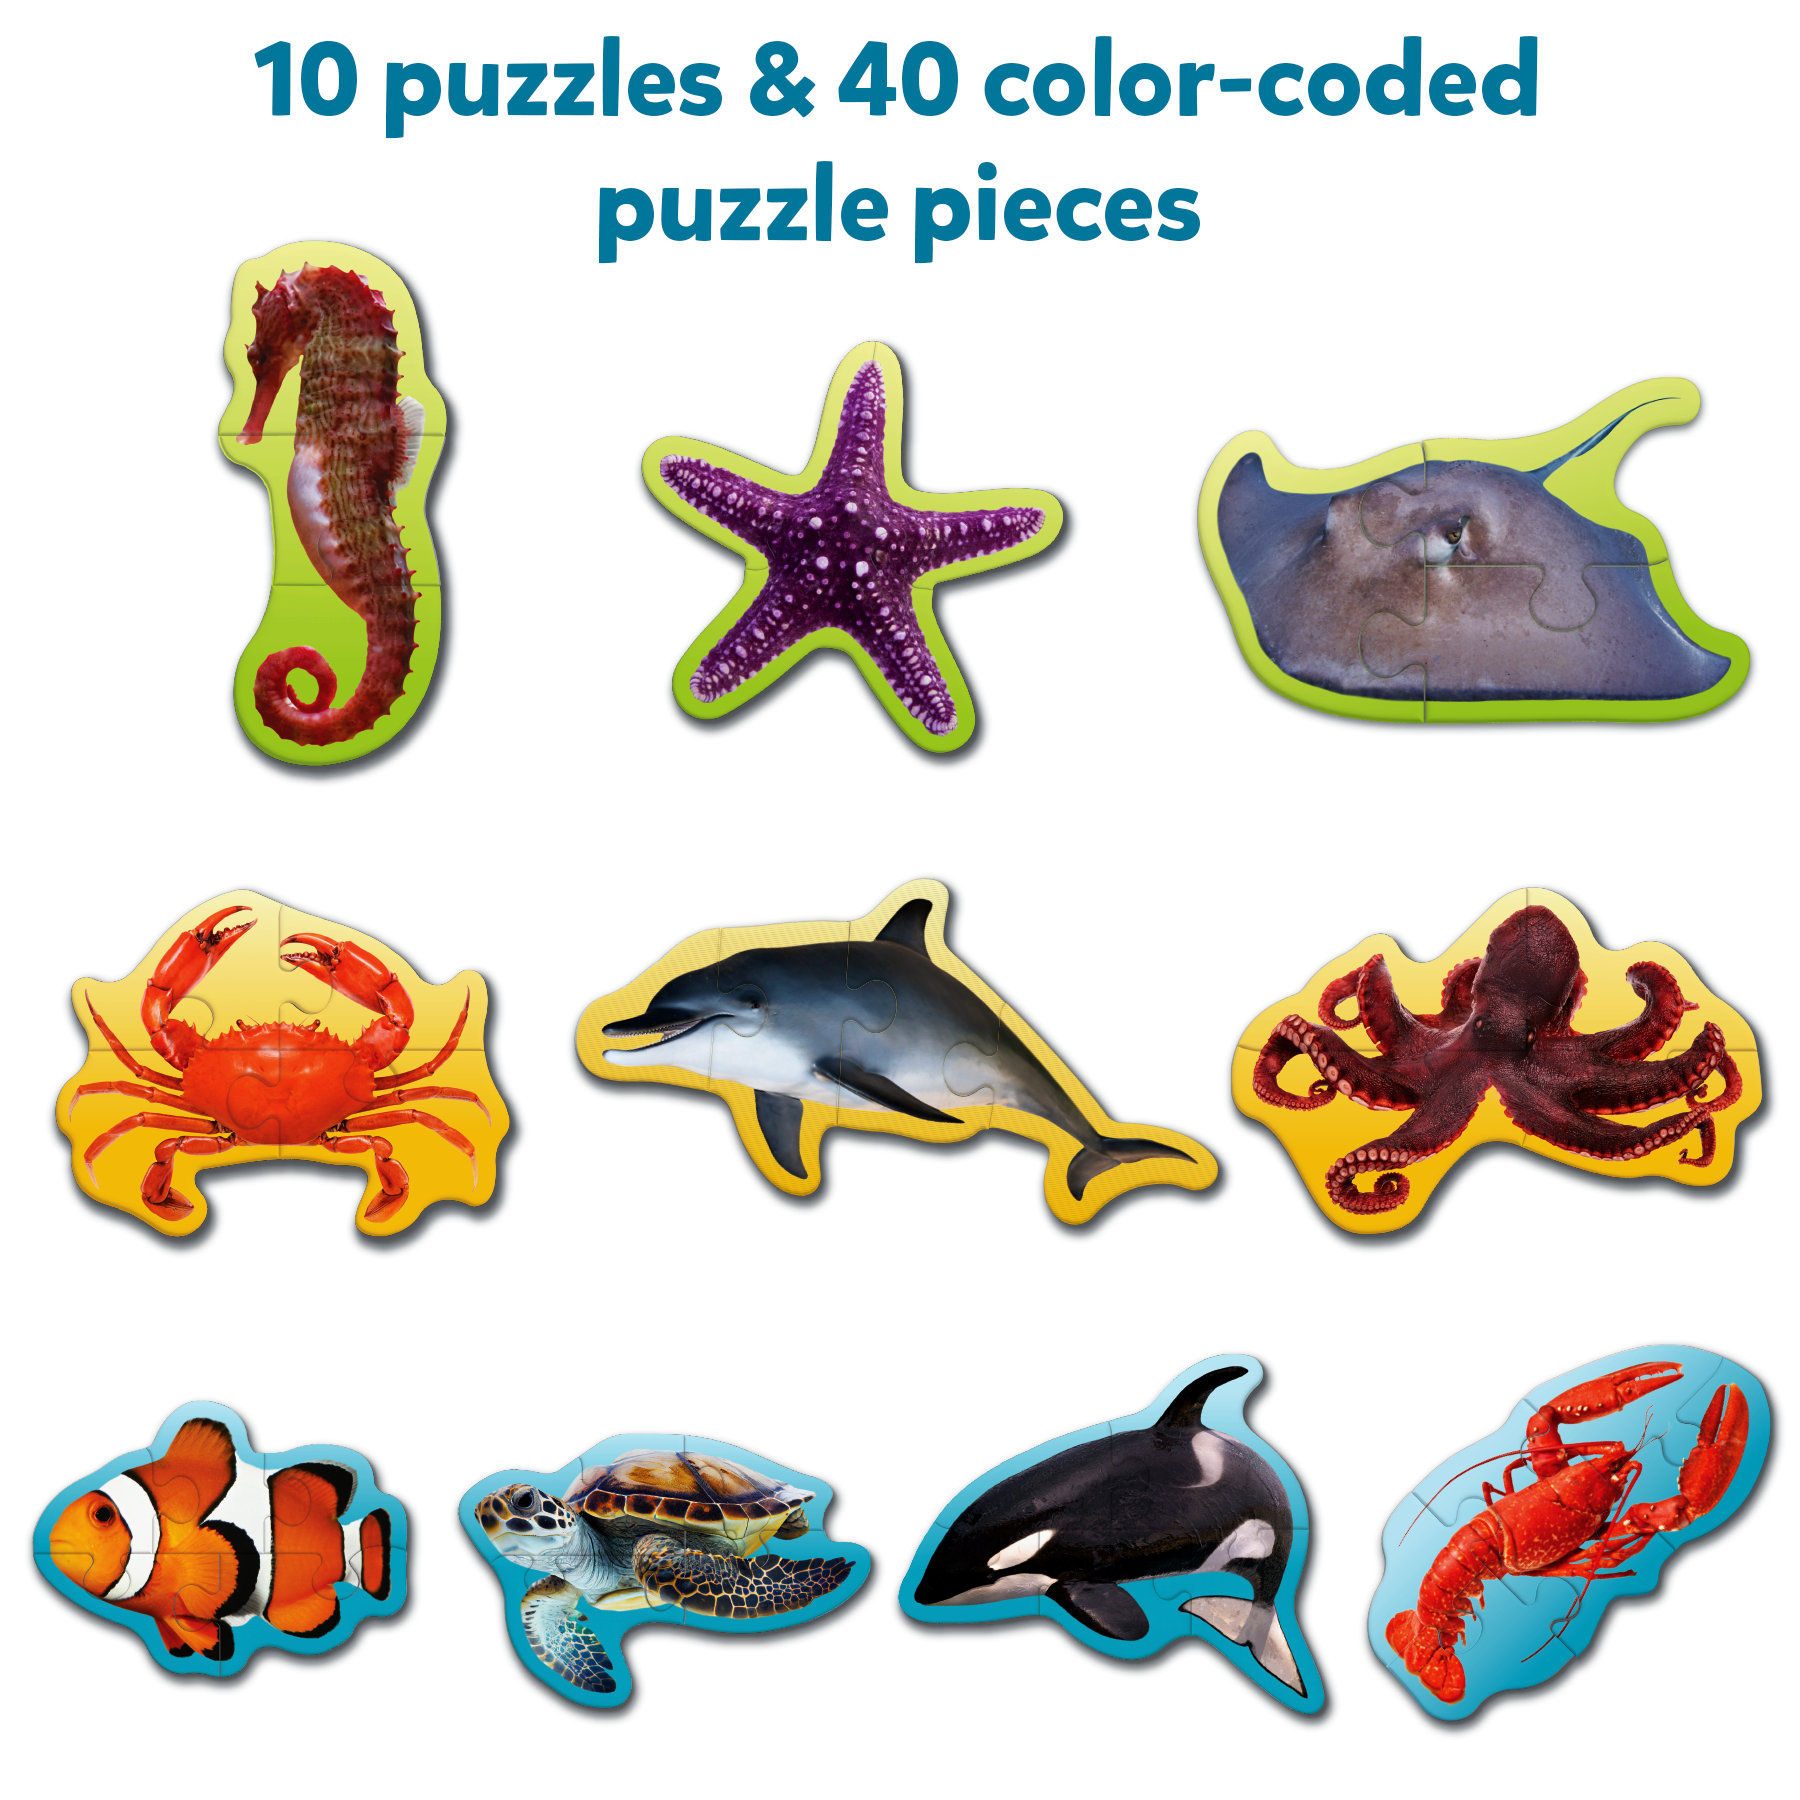 Skillmatics Step by Step Puzzle - 41 Piece Underwater Animal Jigsaw & Toddler Puzzles for Stage-Based Learning, Educational Montessori Toy Boy & Girl, Gifts for Kids Ages 3 and Up